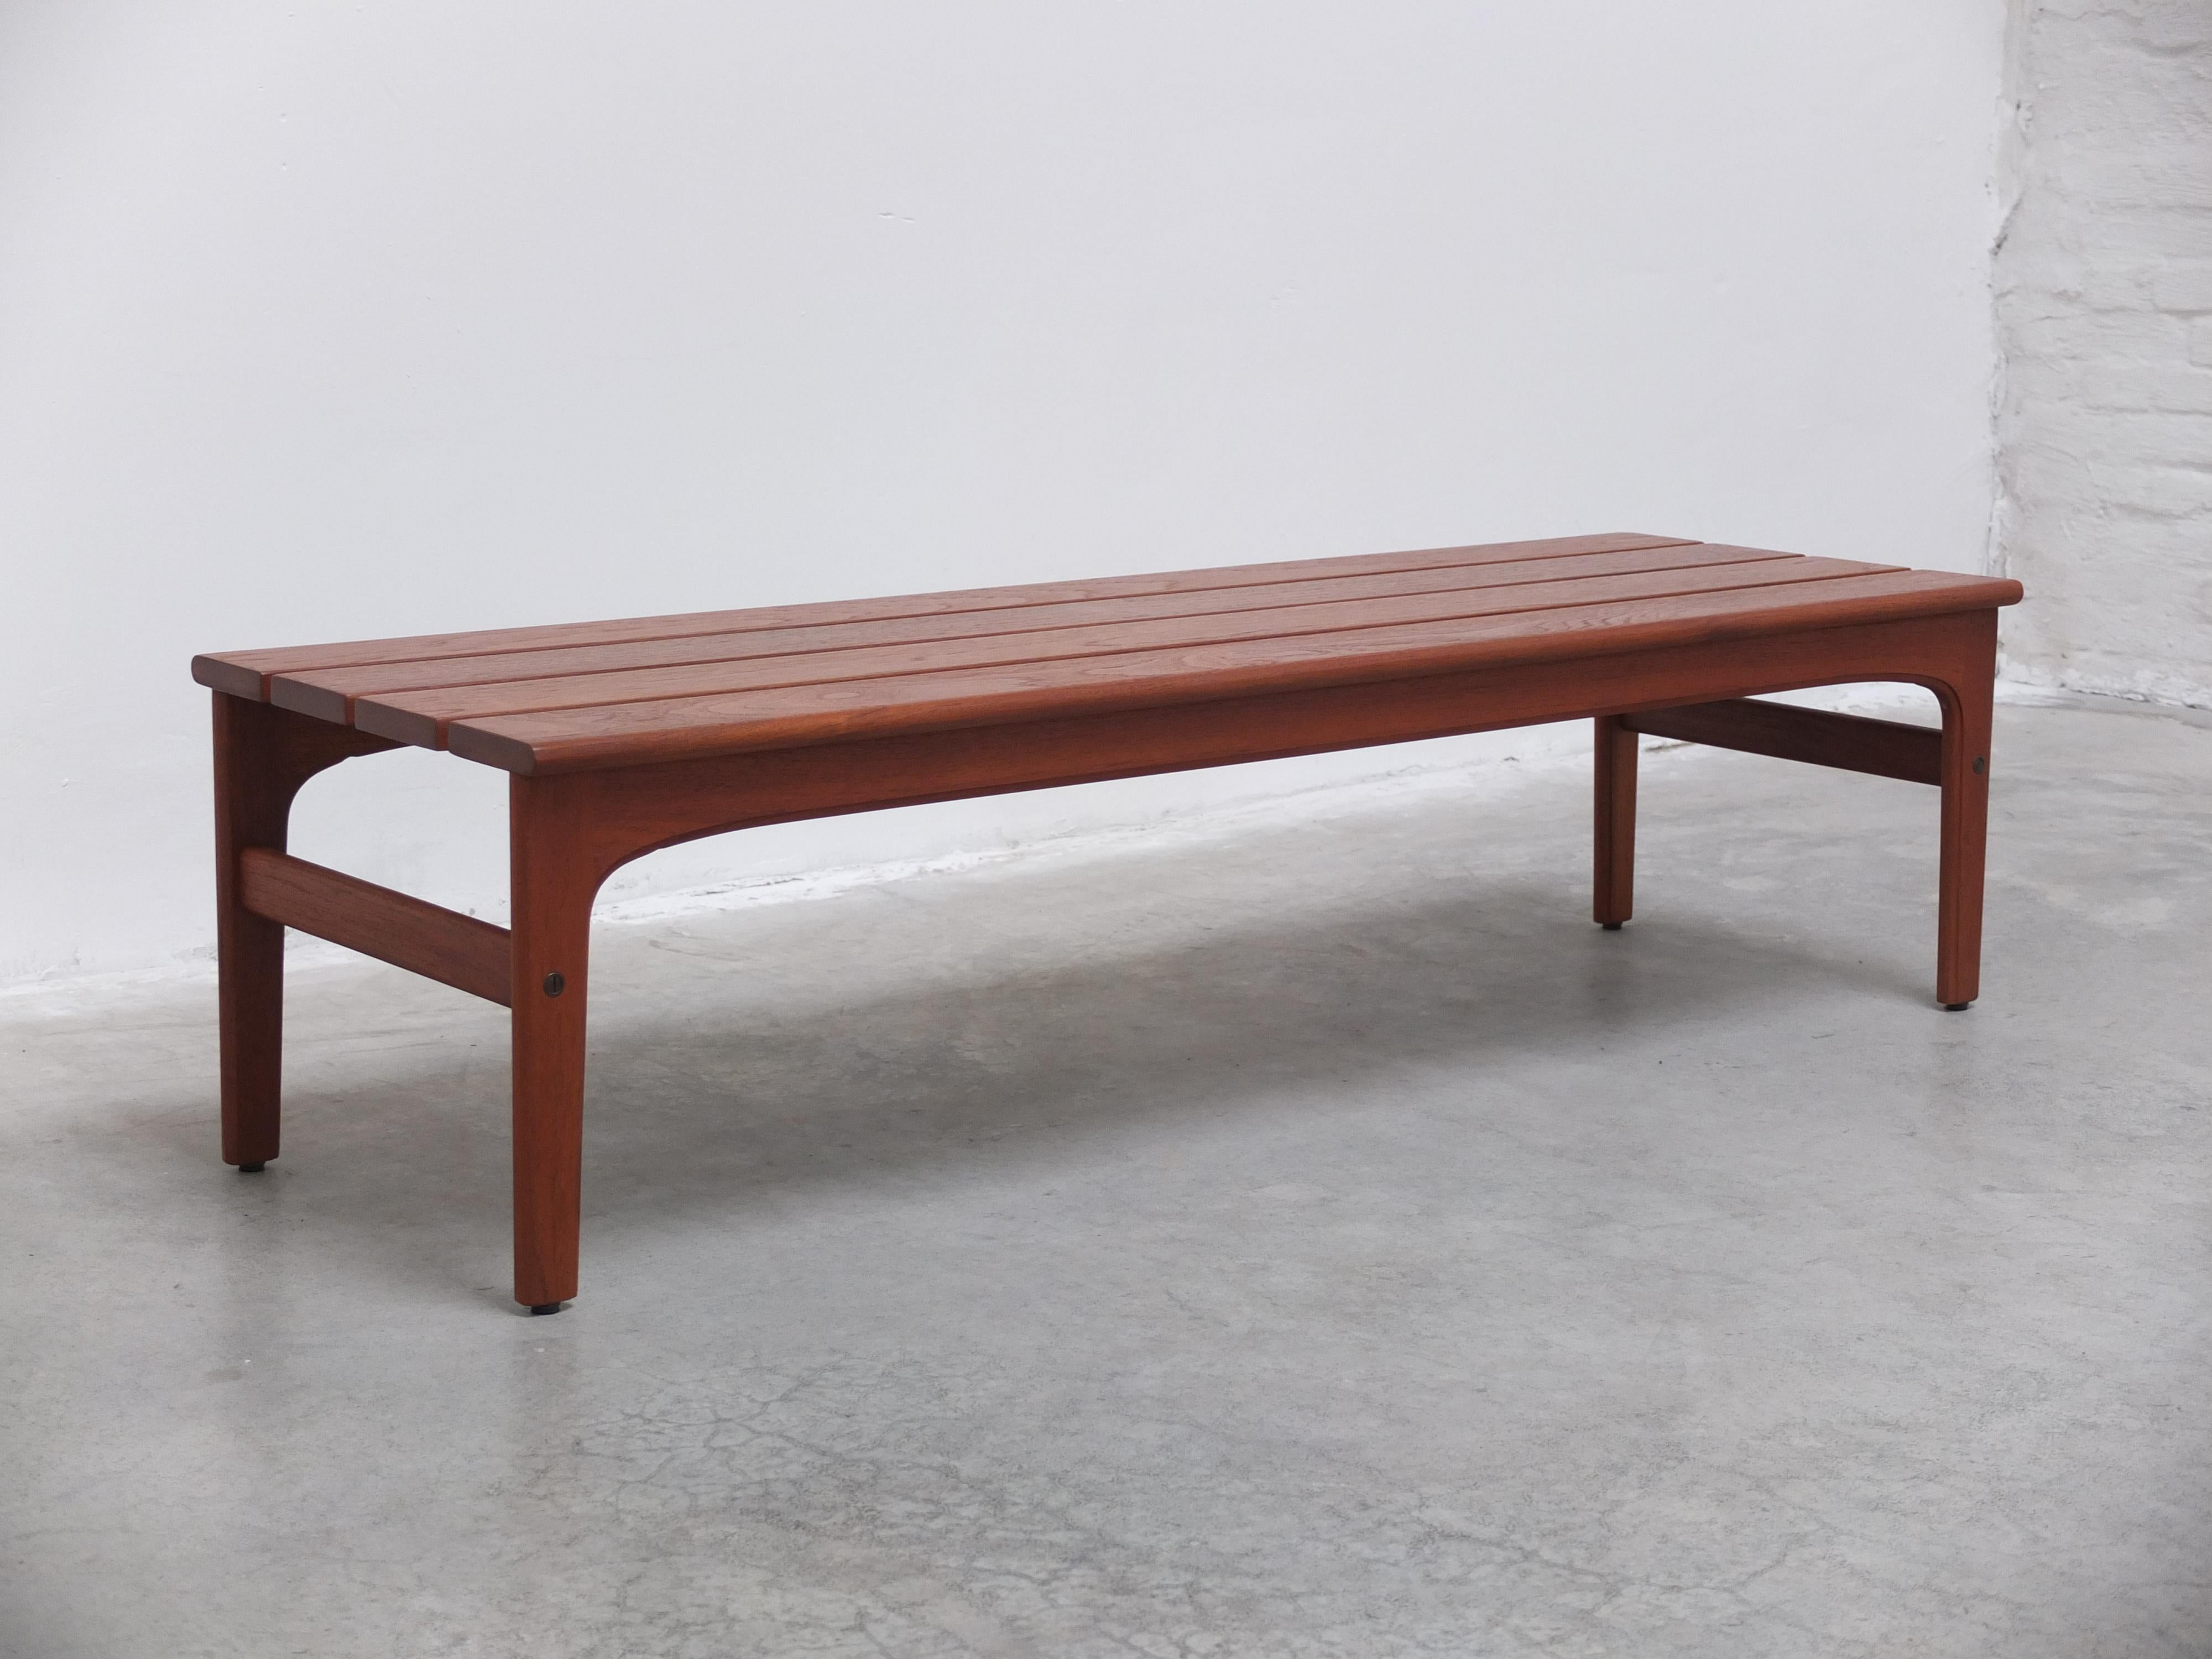 20th Century Teak Slatted Bench or Coffee Table by Yngvar Sandström for AB Sëffle, 1960s For Sale